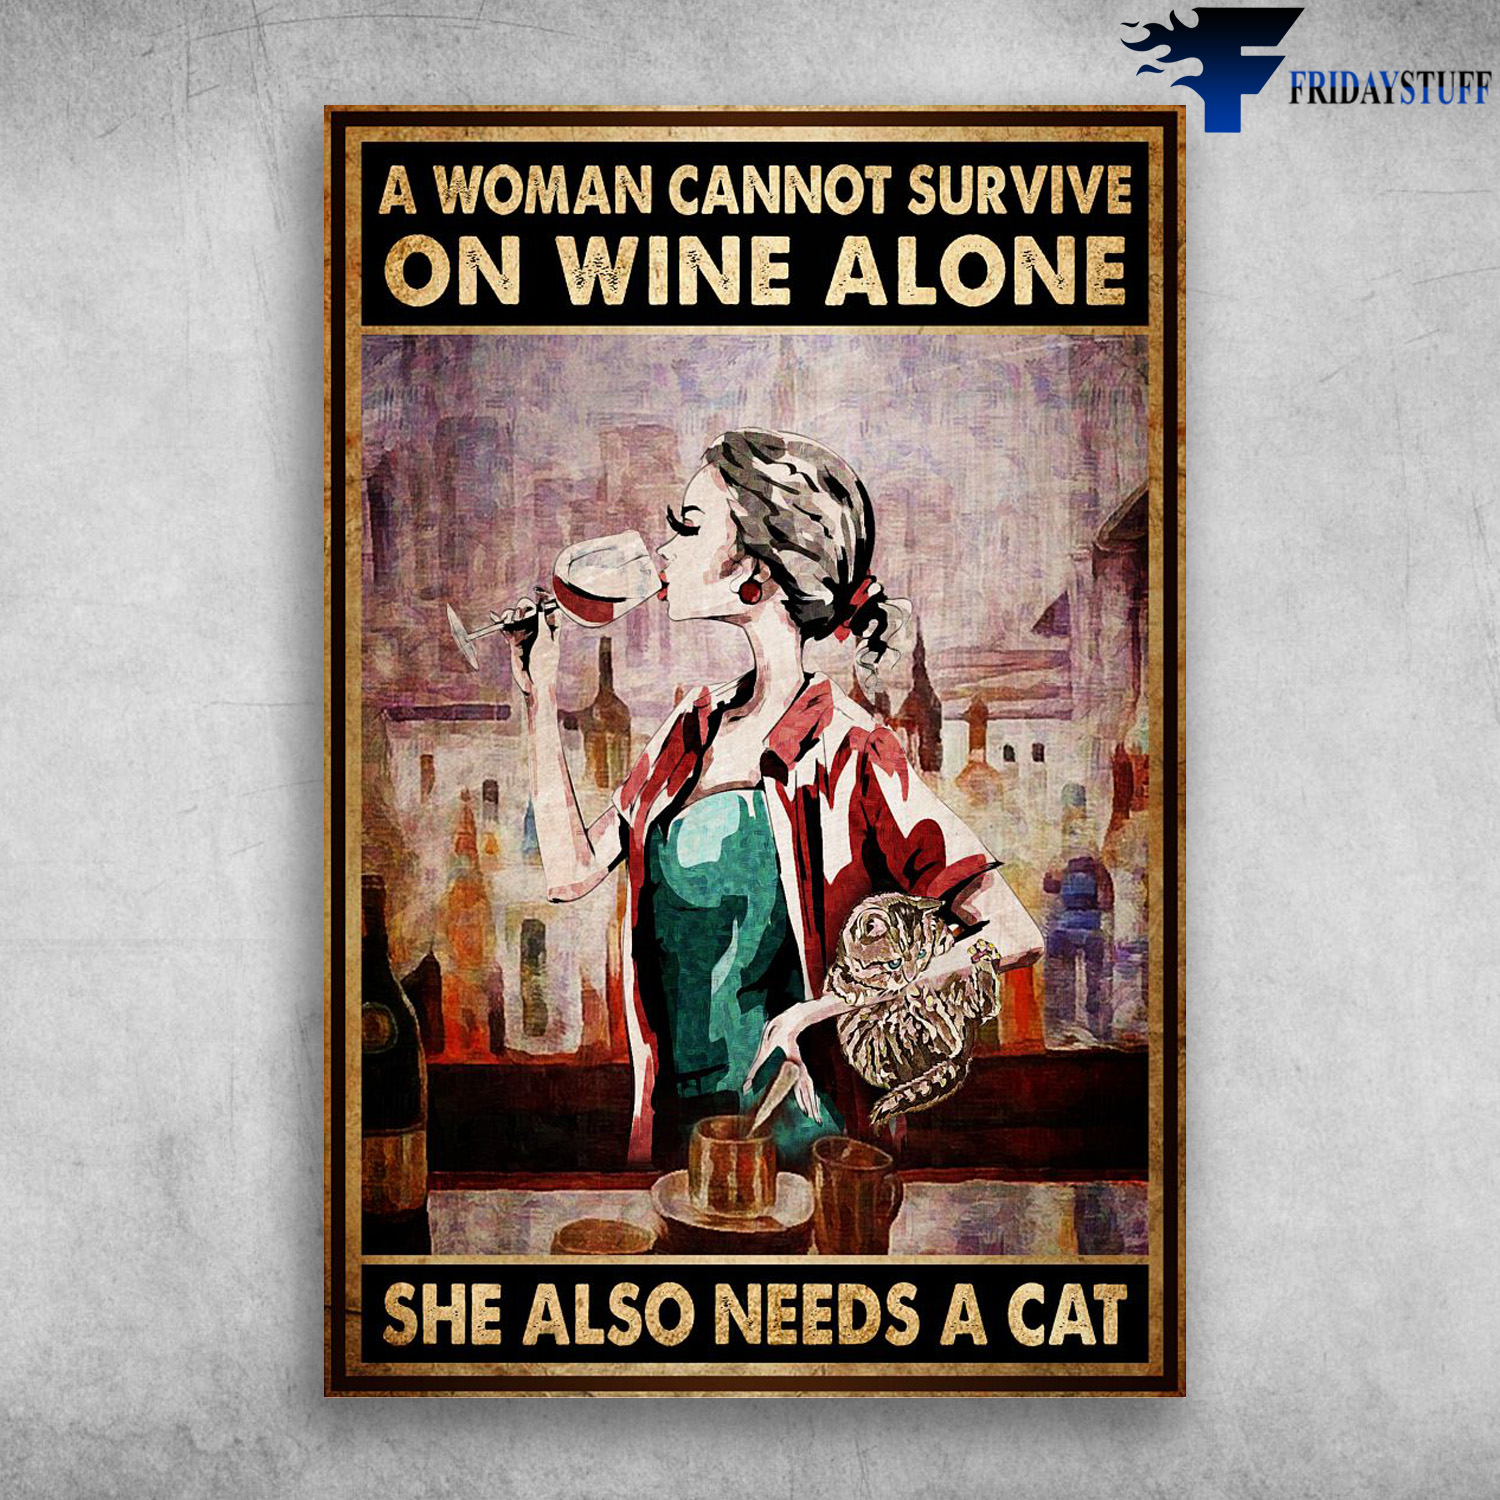 Girl Loves Cat And Wine - A Woman Cannot Survive On Wine Alone, She Also Need A Cat